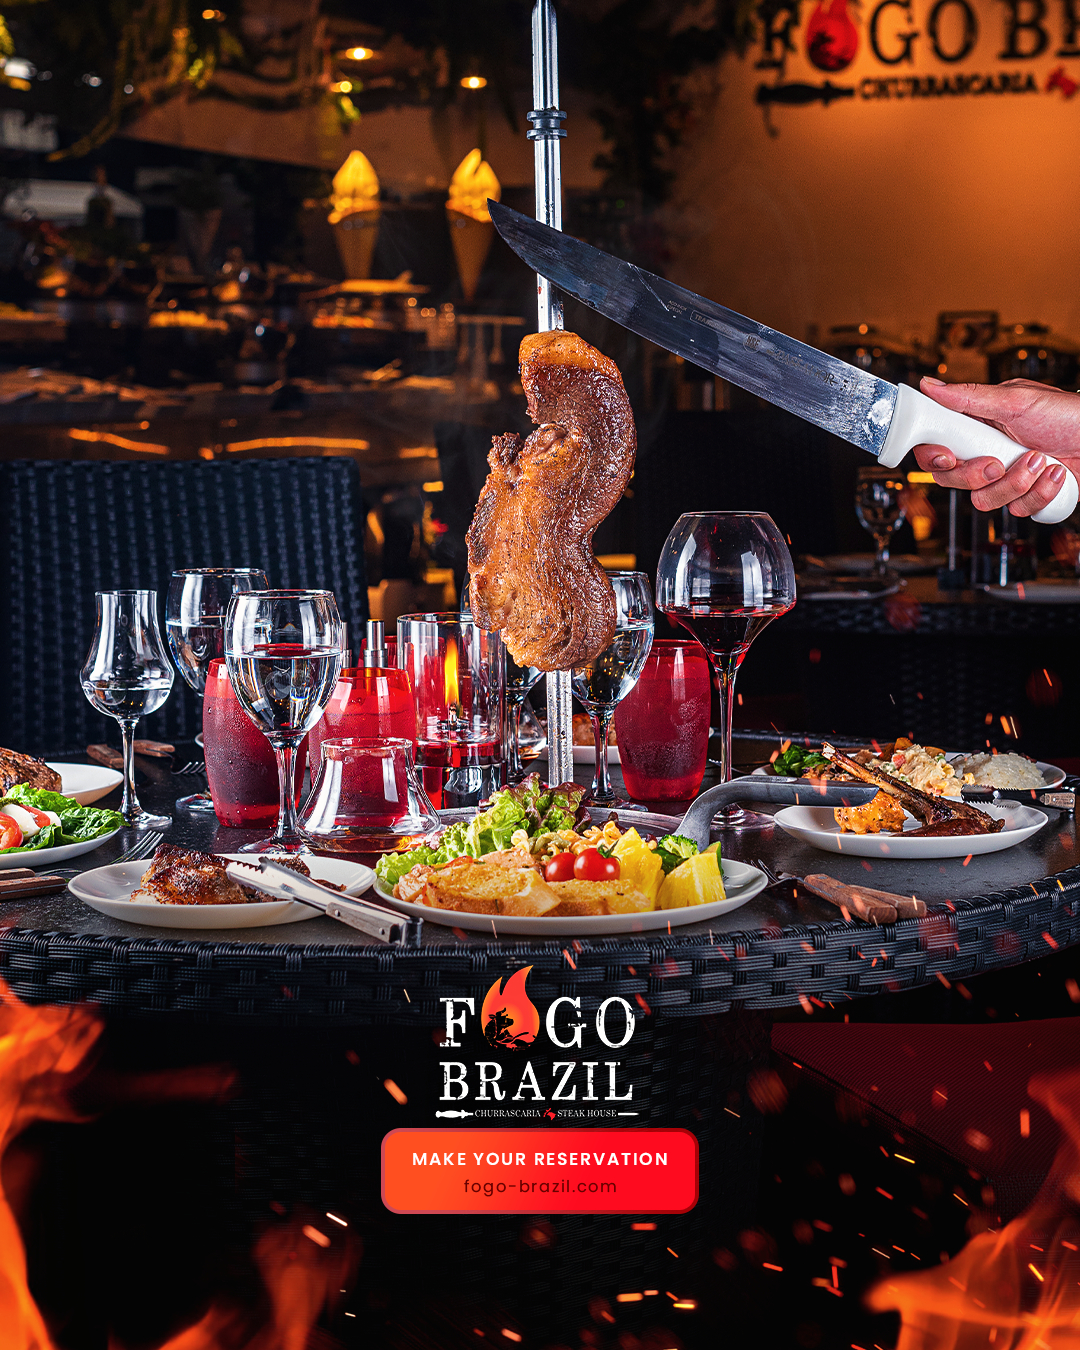 My Fogo Brazil Experience: A Proposal and a Delicious Dinner